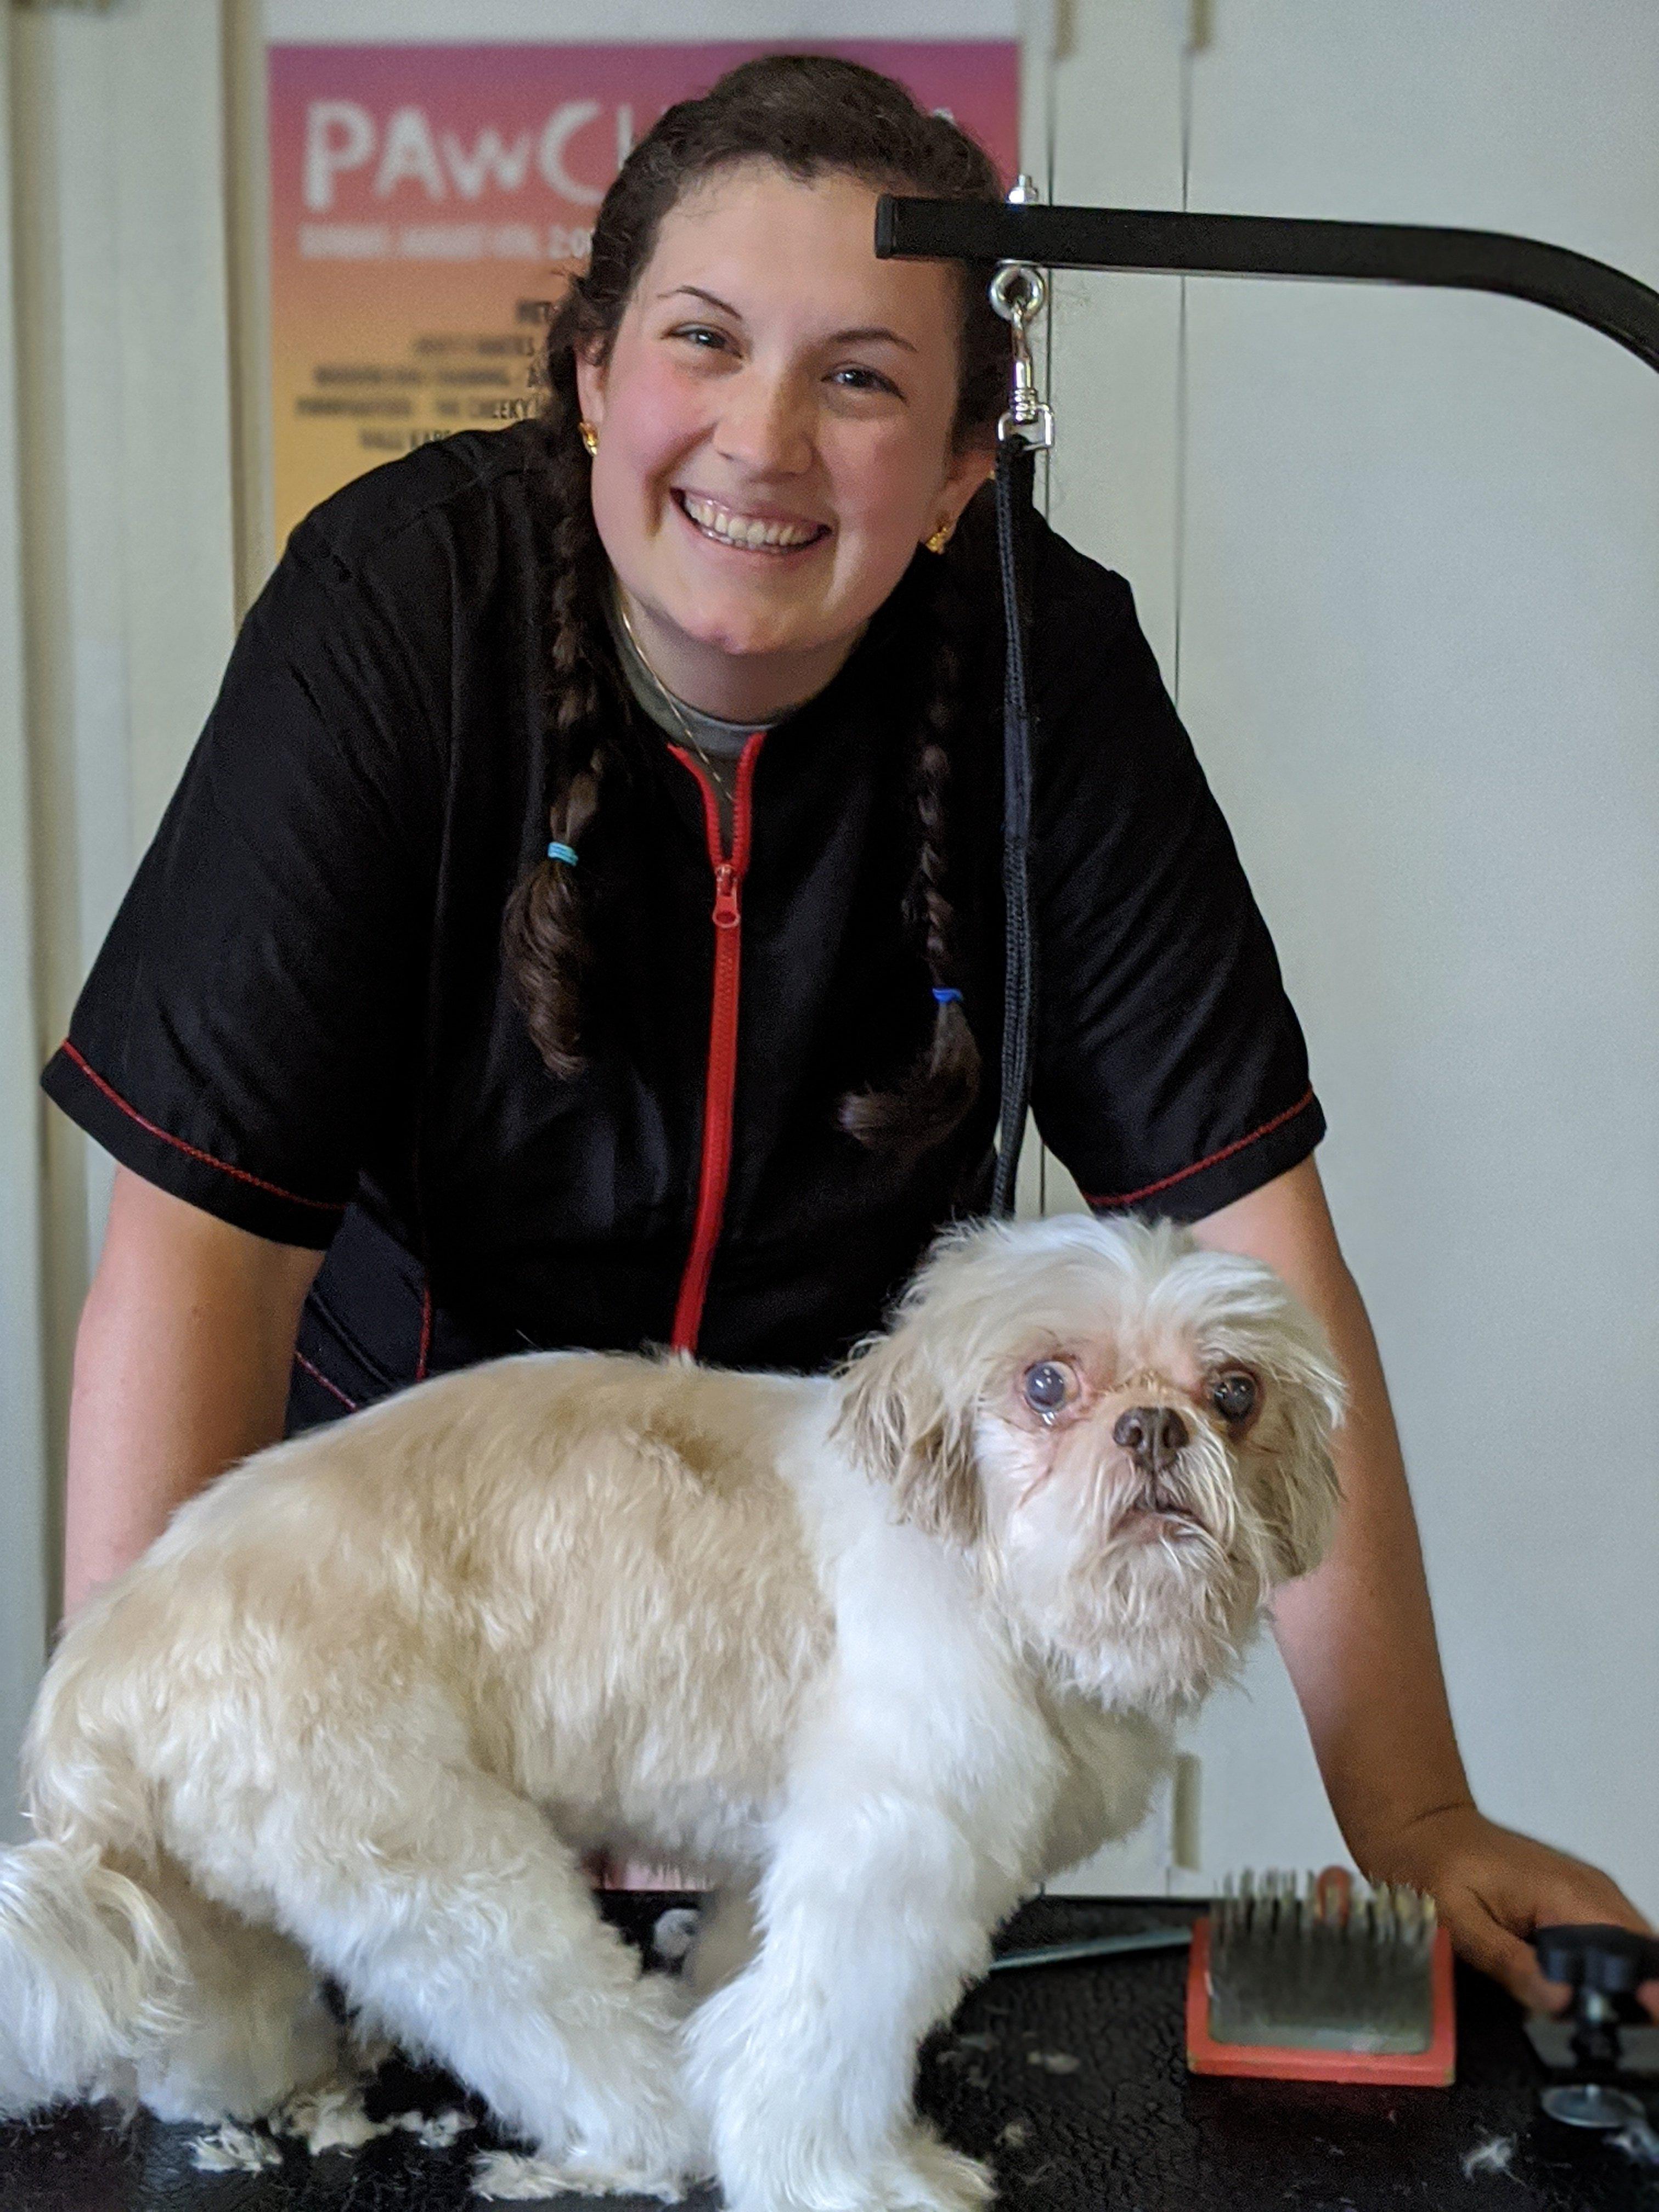 What to look for in a Senior Dog Groomer